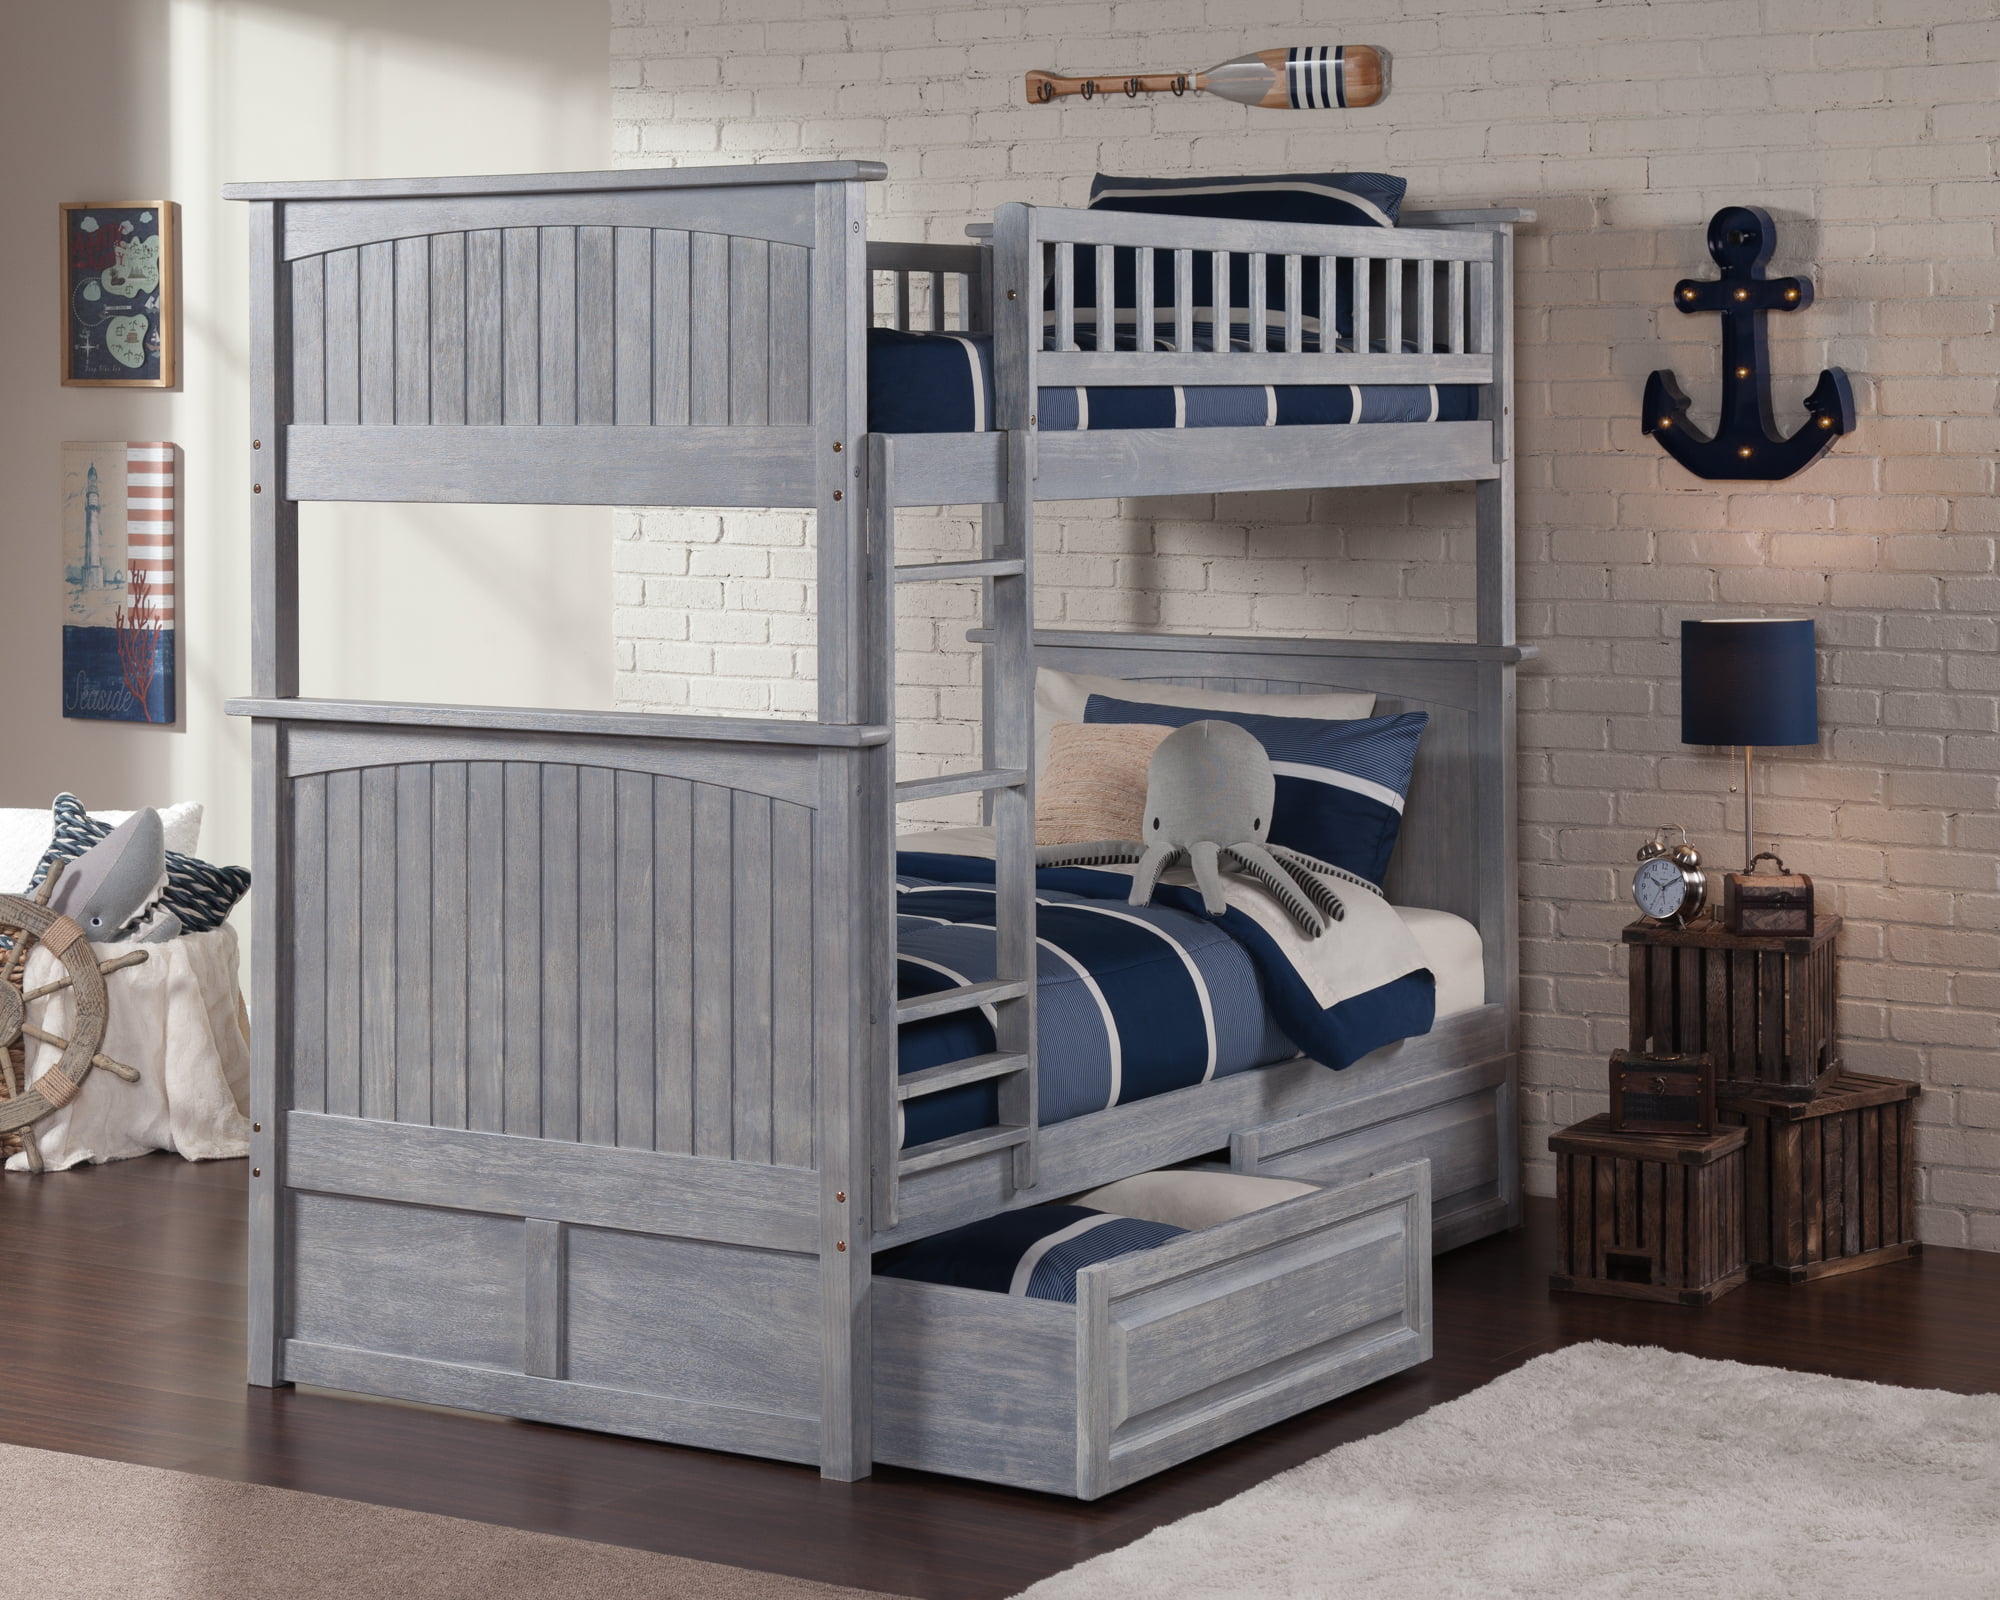 Nantucket Bunk Bed Twin Over With, Nantucket Bunk Bed